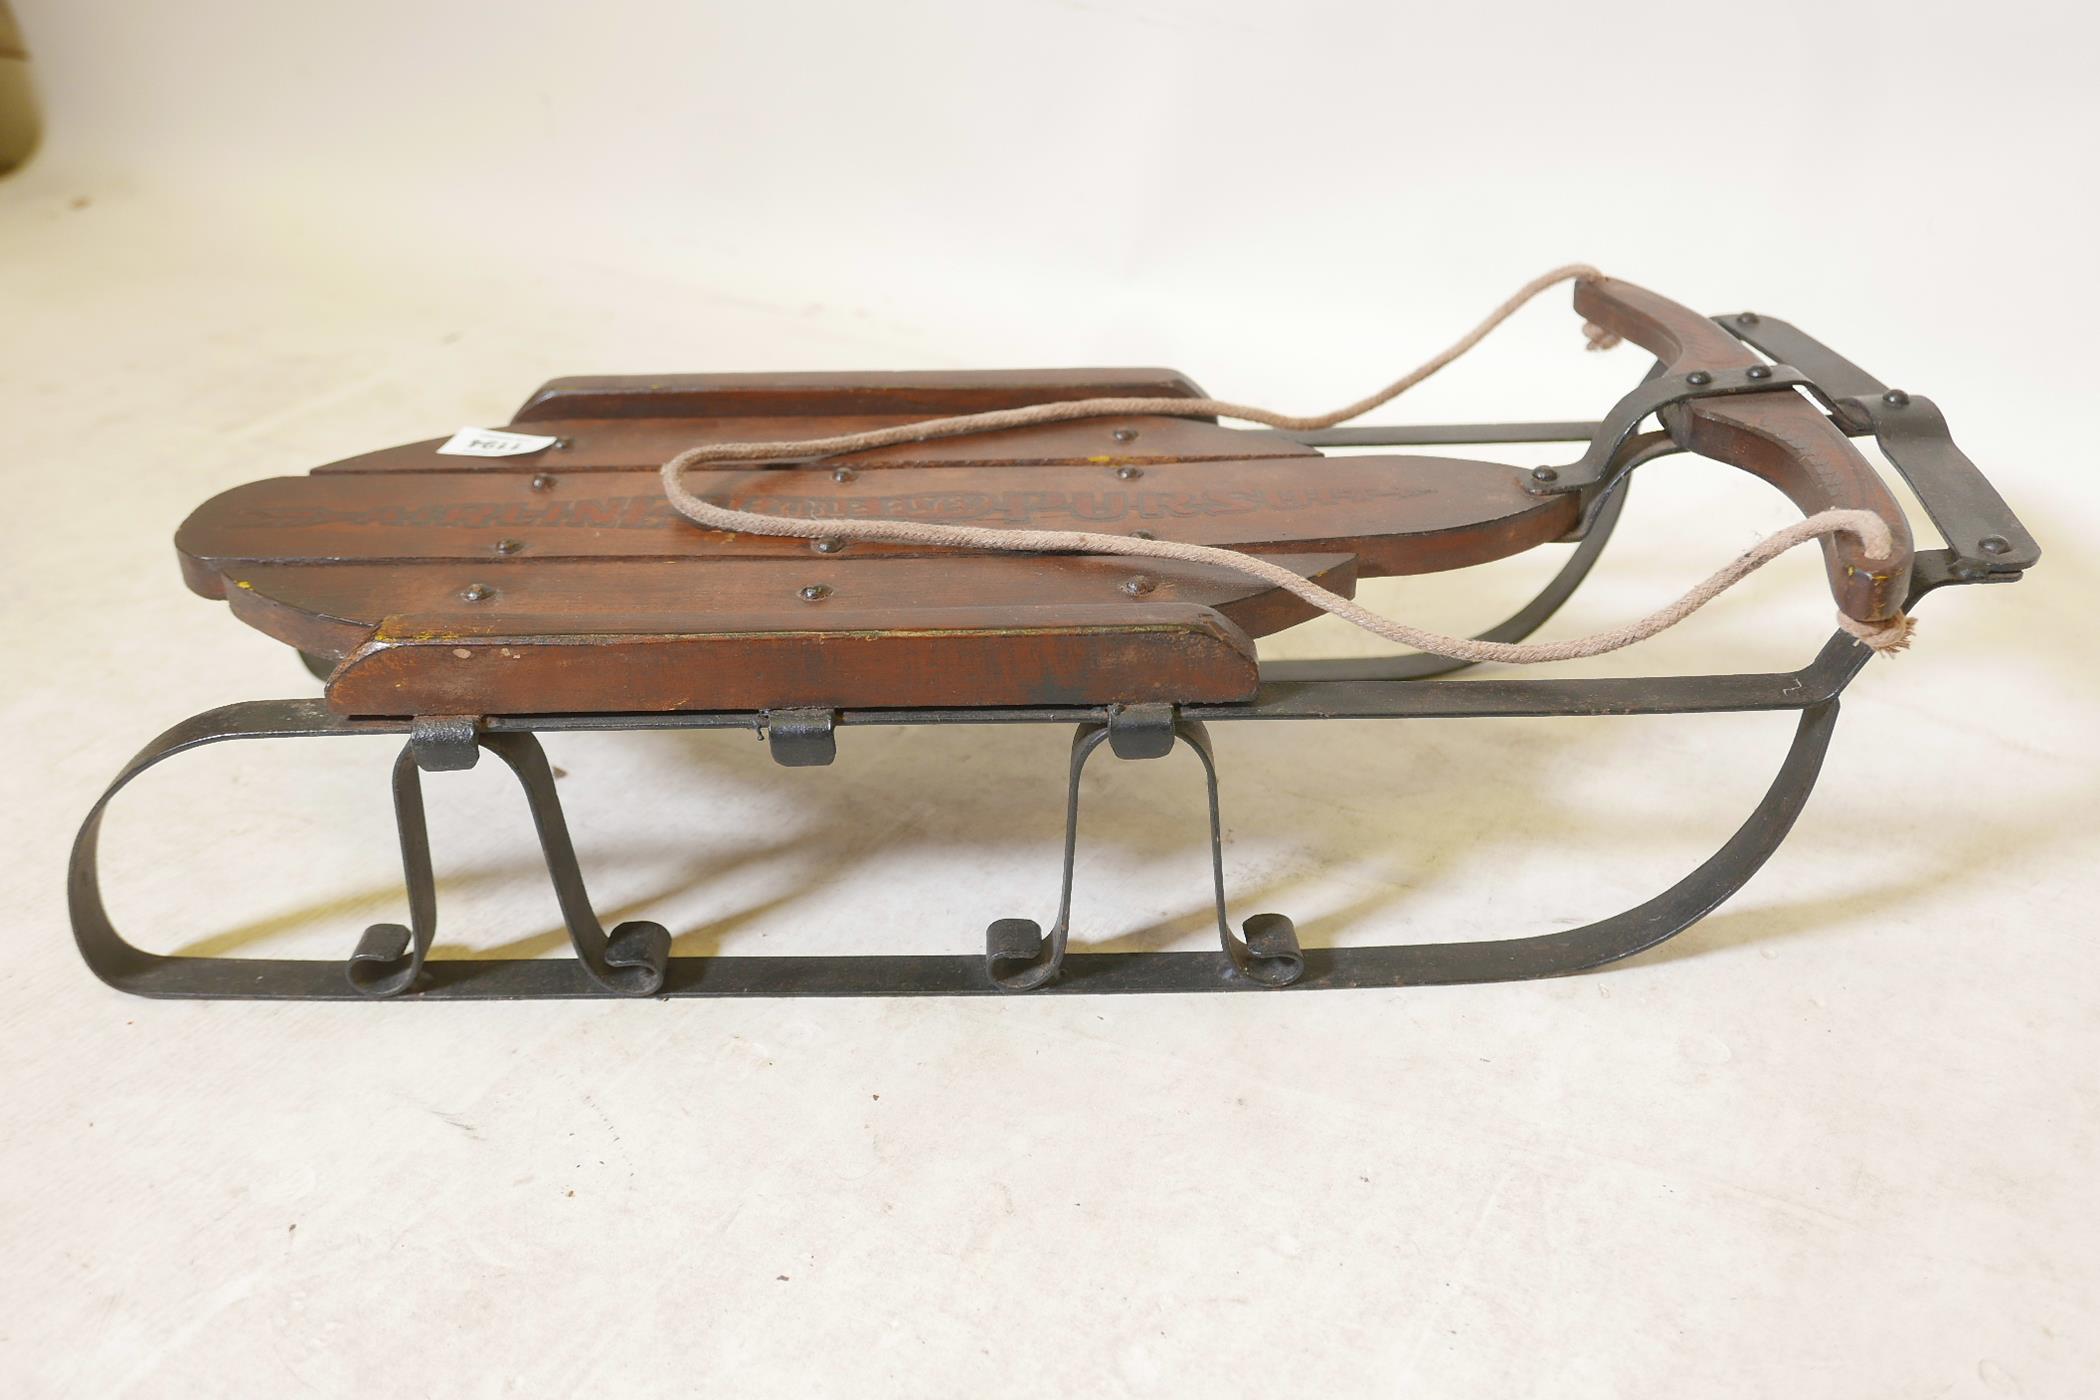 A wrought metal and wood 'Airline Pursuit' child's sled, 24" x 9" x 6"